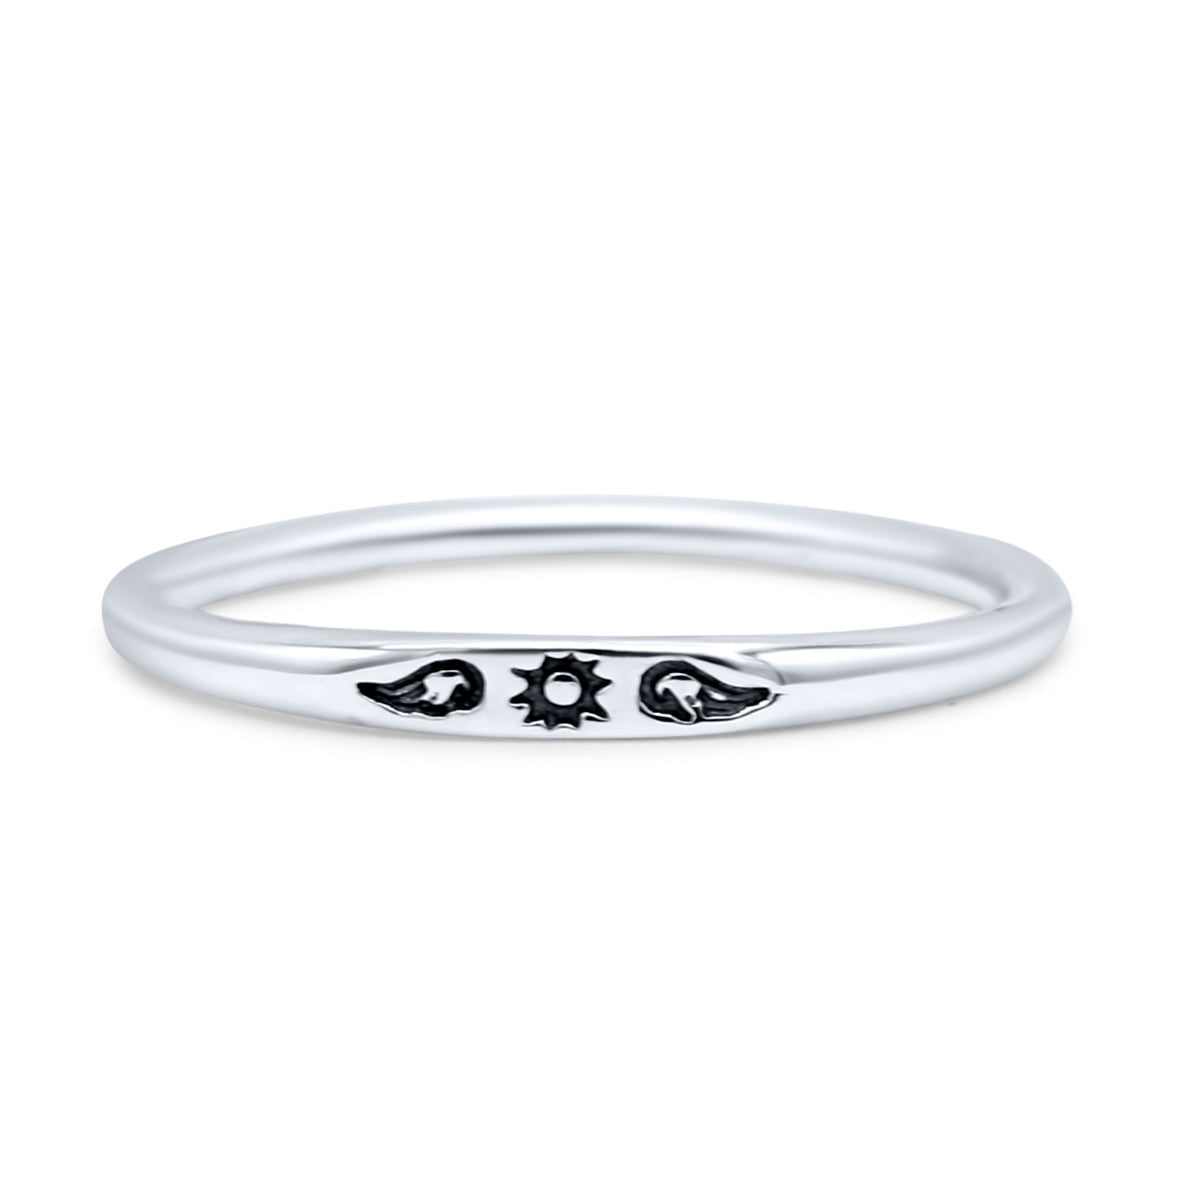 Tiny Dainty Small Sun Engraved Infinity And Wings Ring Band 925 Sterling  Silver Size 6